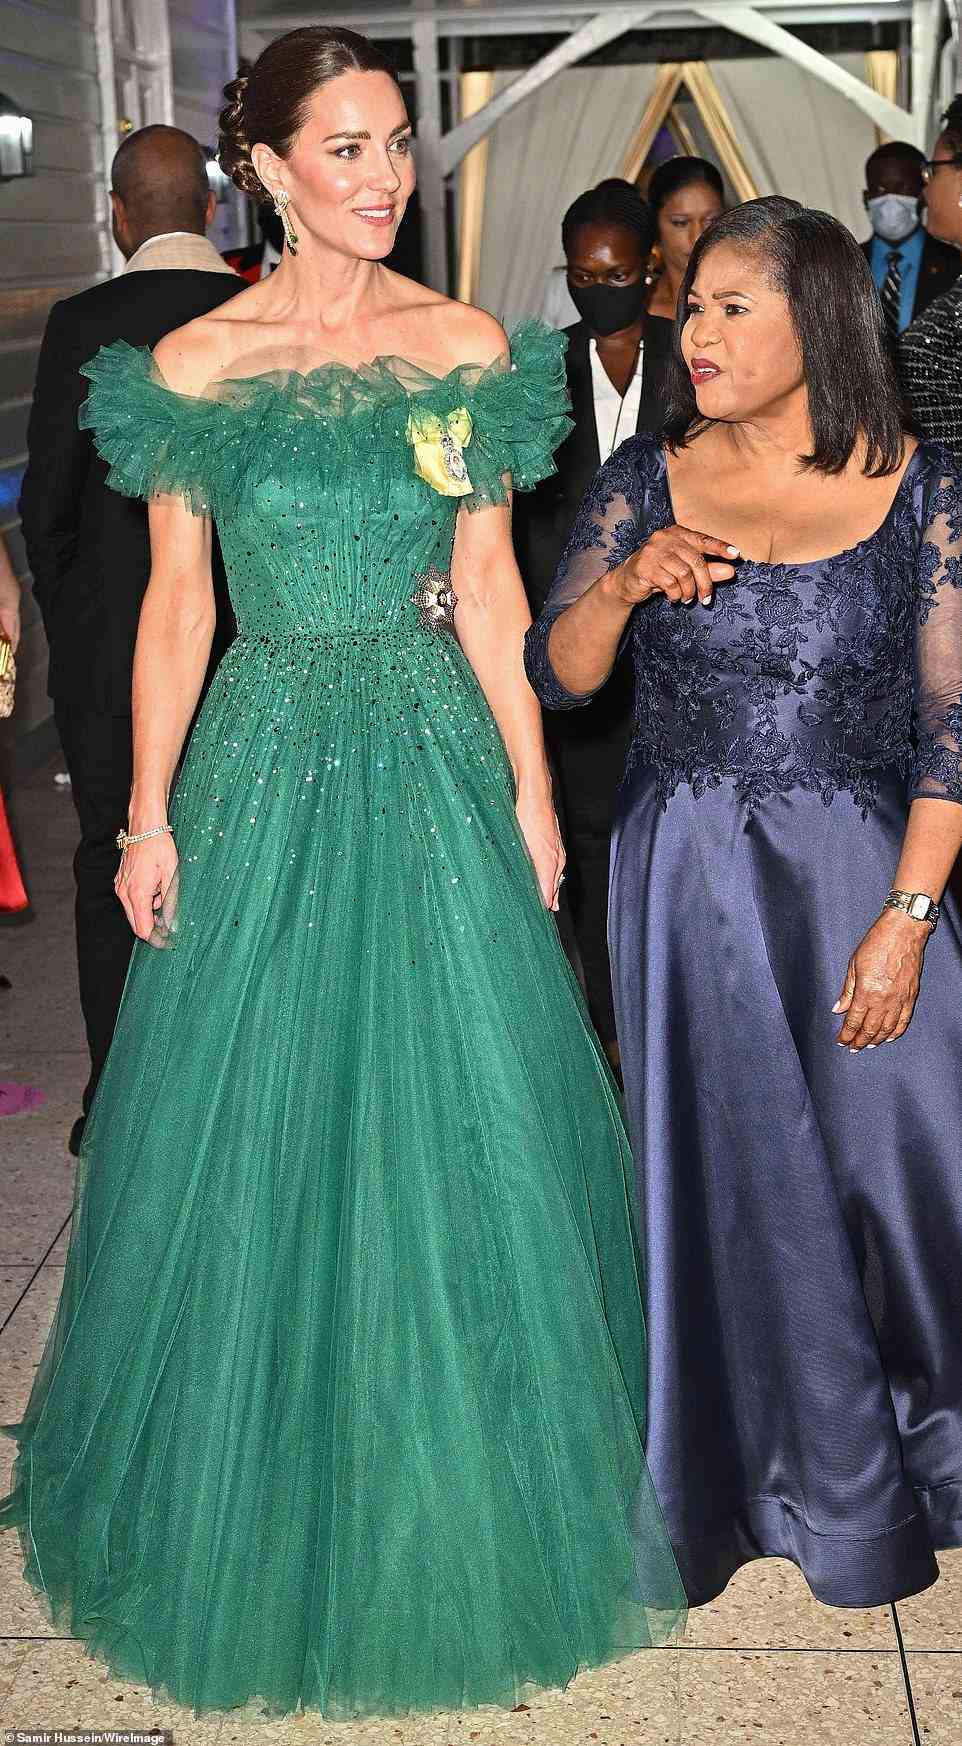 Pictured: Catherine, Duchess of Cambridge and Patricia Allen during the evening dinner